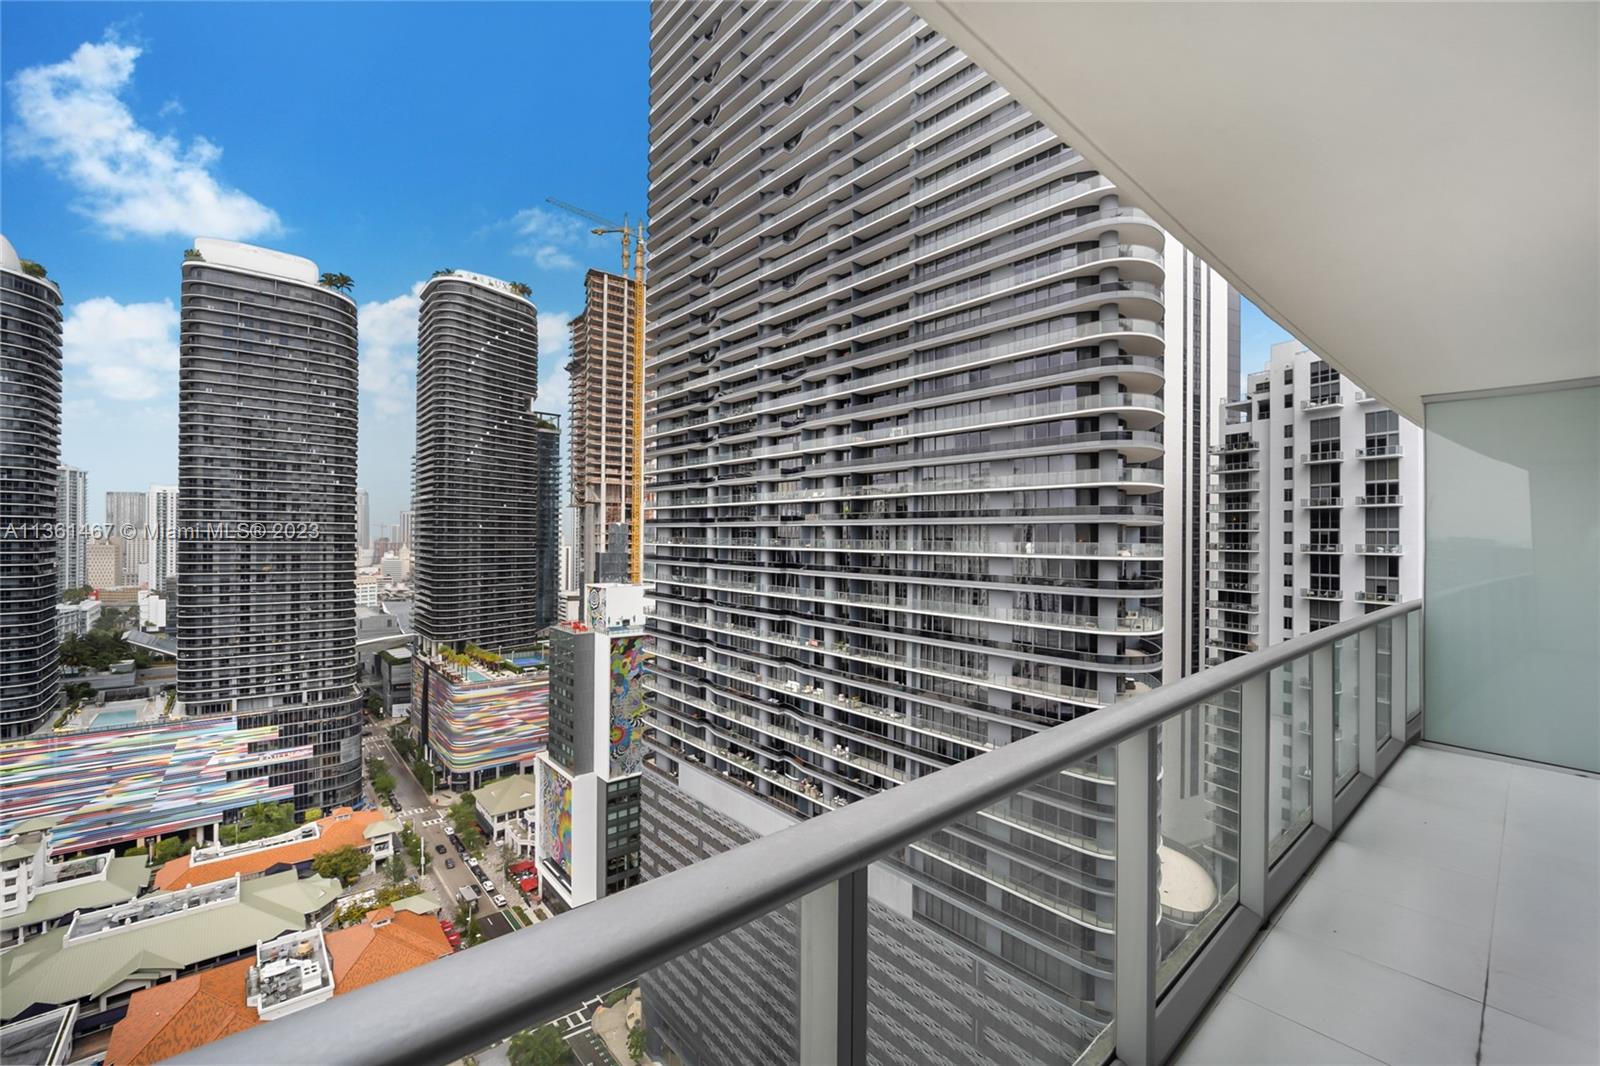 Unique find in Brickell. 1 Bed/1 Bath designed by Pininfarina. Excellent location in the middle of Mary Brickell. Terrace balcony with glass railing for unobstructed city view, 9 Ft. ceiling and top-of-the-line European designed kitchen with stainless steel appliances and floors. Walk in California closets. 24 Hr security and concierge in lobby. Resort-style living with 2 pools, SPA, gym, movie theater & more! 10 month rental only